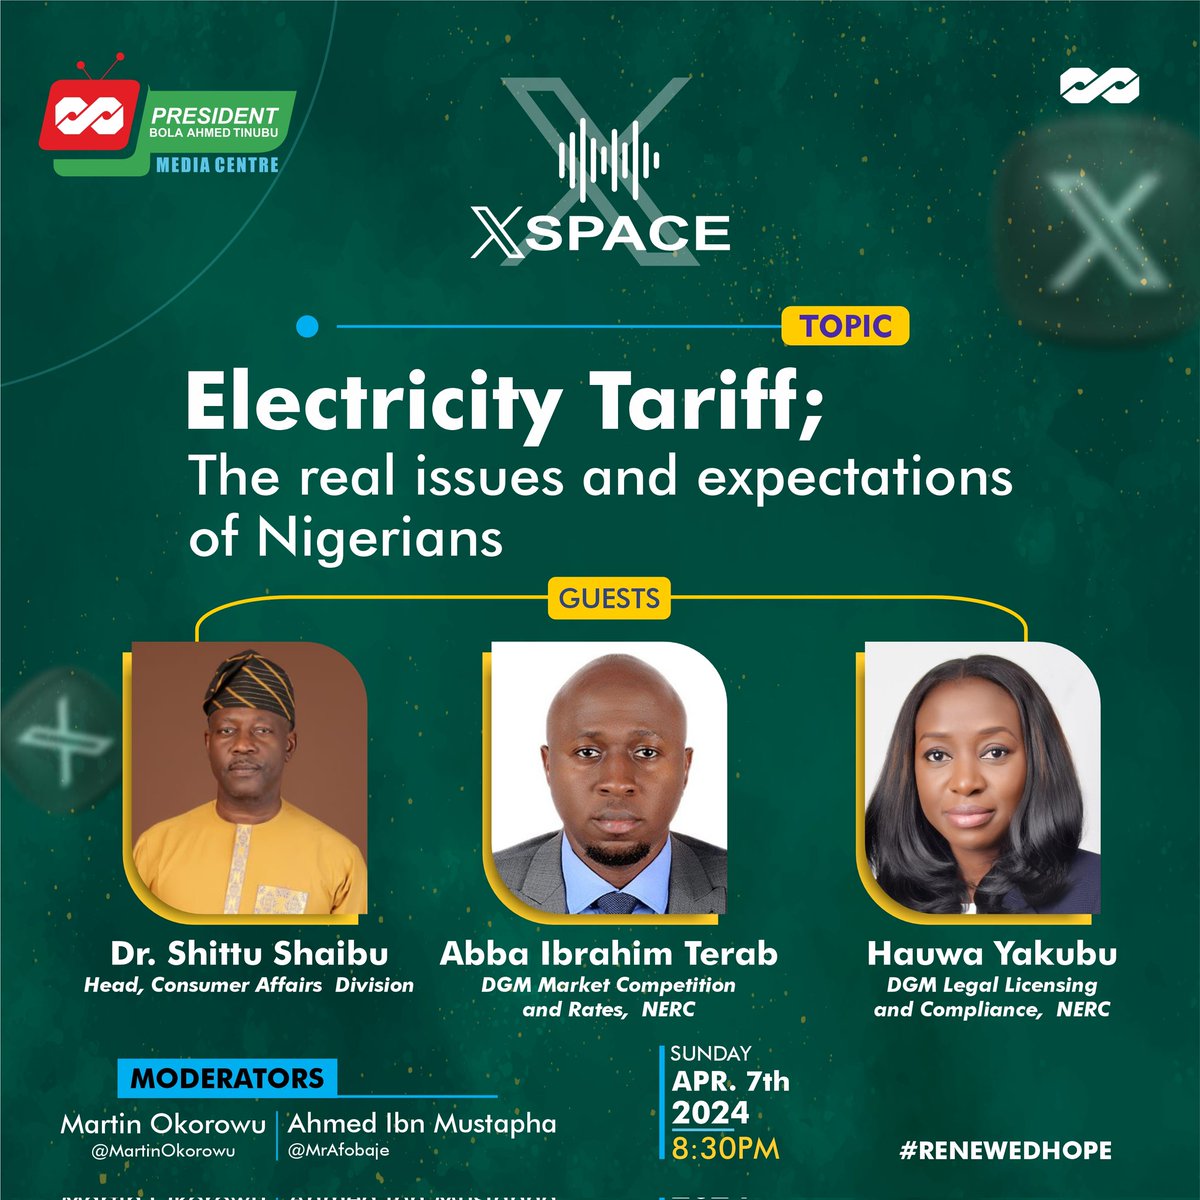 Please don't miss this. 8:30pm tonight. Questions will get answers and clarifications, expectations and issues concerning the Electricity tarrif courtesy of officials from @NERCNG and @PBATMediaCentre